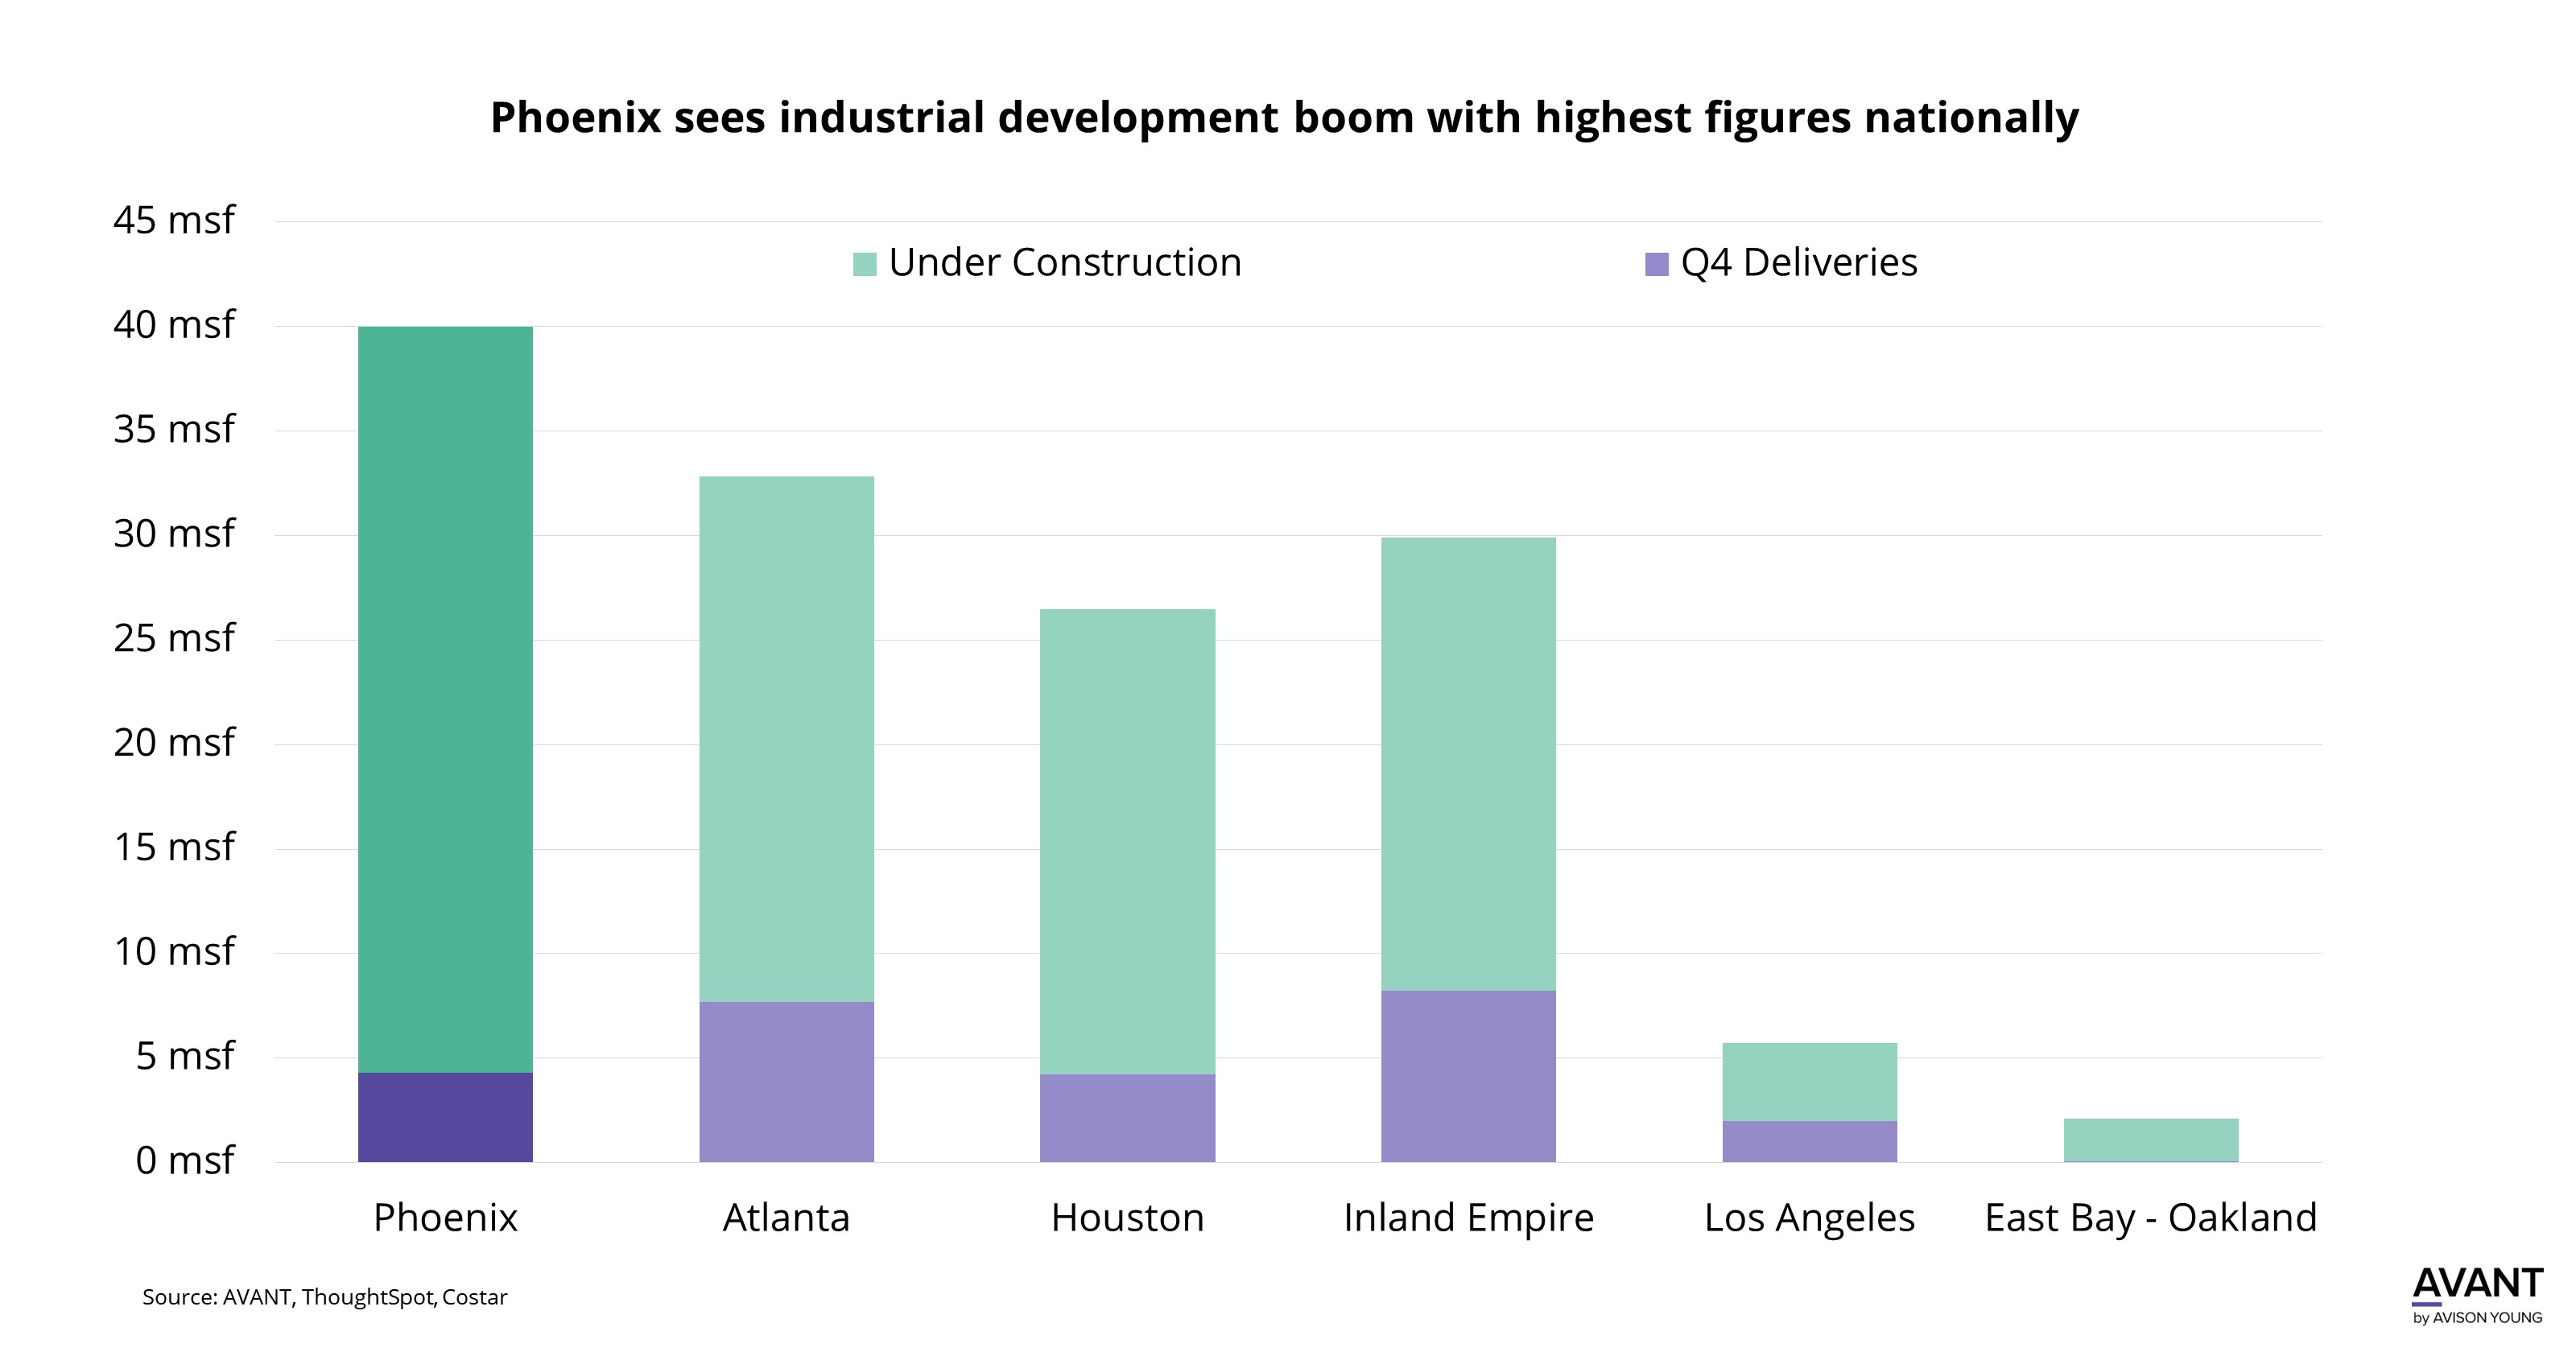 Bar graph displaying Phoenix CRE industrial development boom with highest figures nationally